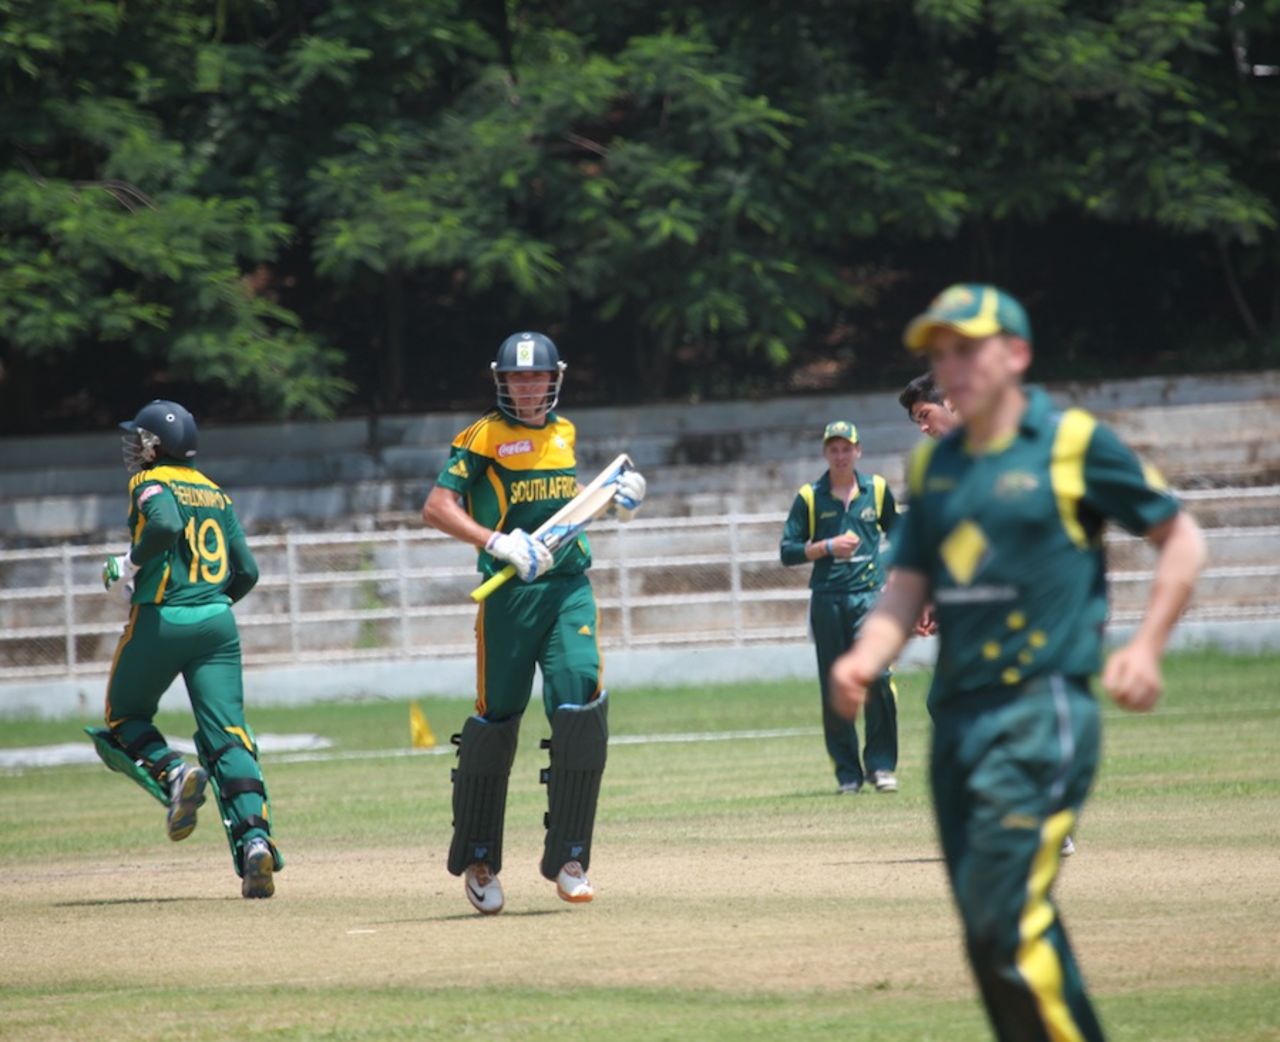 Justin Dill and Andile Phehlukwayo take a run, Australia Under-19s v South Africa Under-19s, Visakhapatnam, Sep 23, 2013